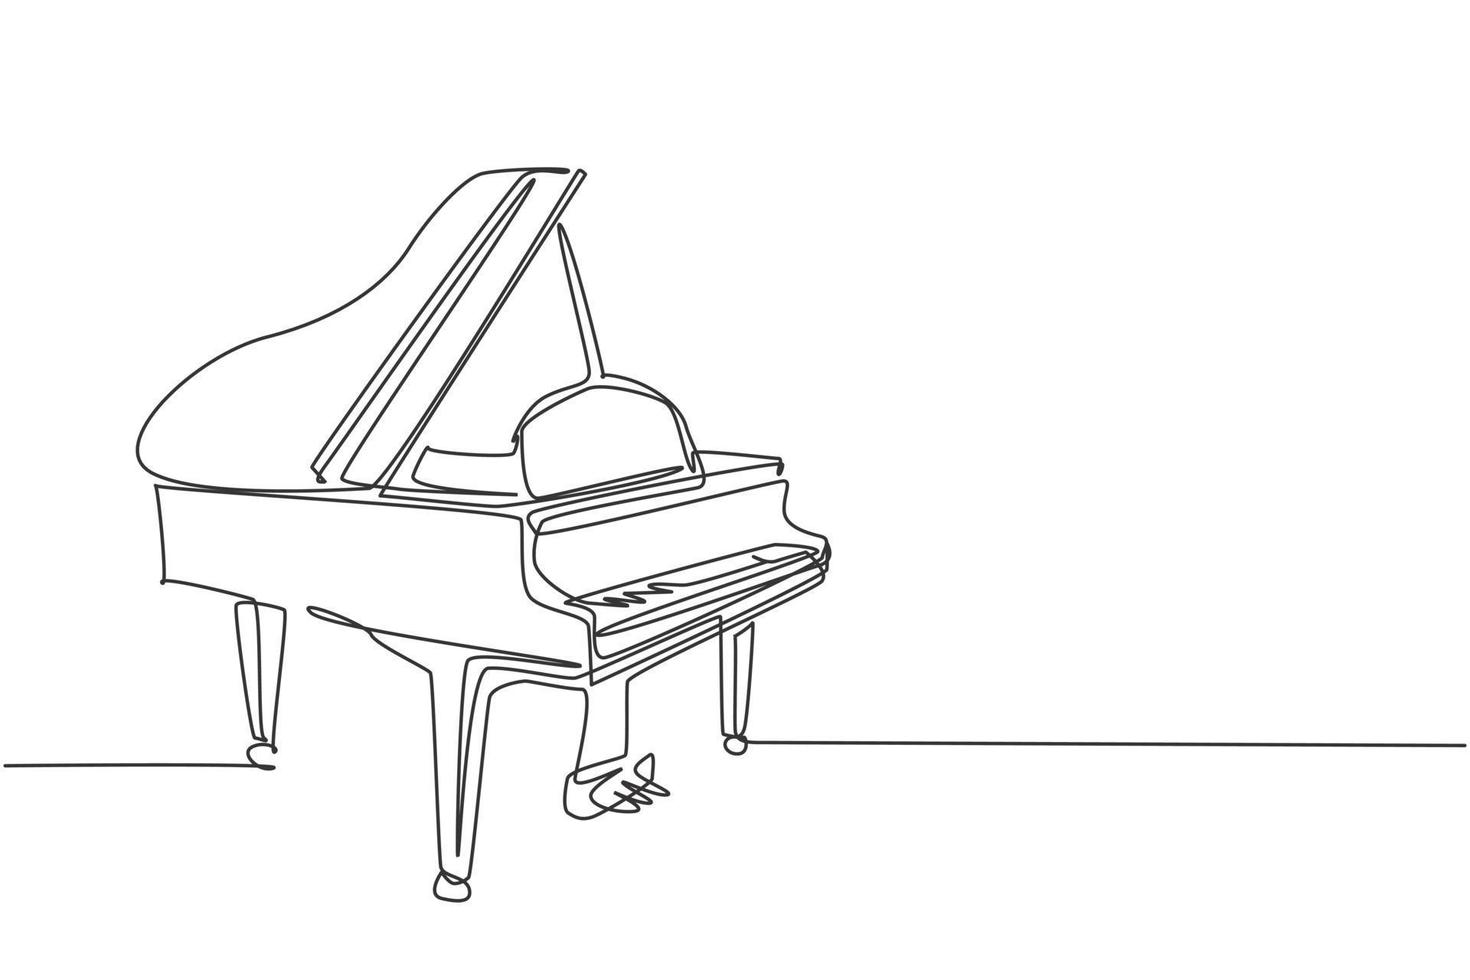 One continuous line drawing of luxury wooden grand piano. Classical music instruments concept. Trendy single line draw design graphic vector illustration